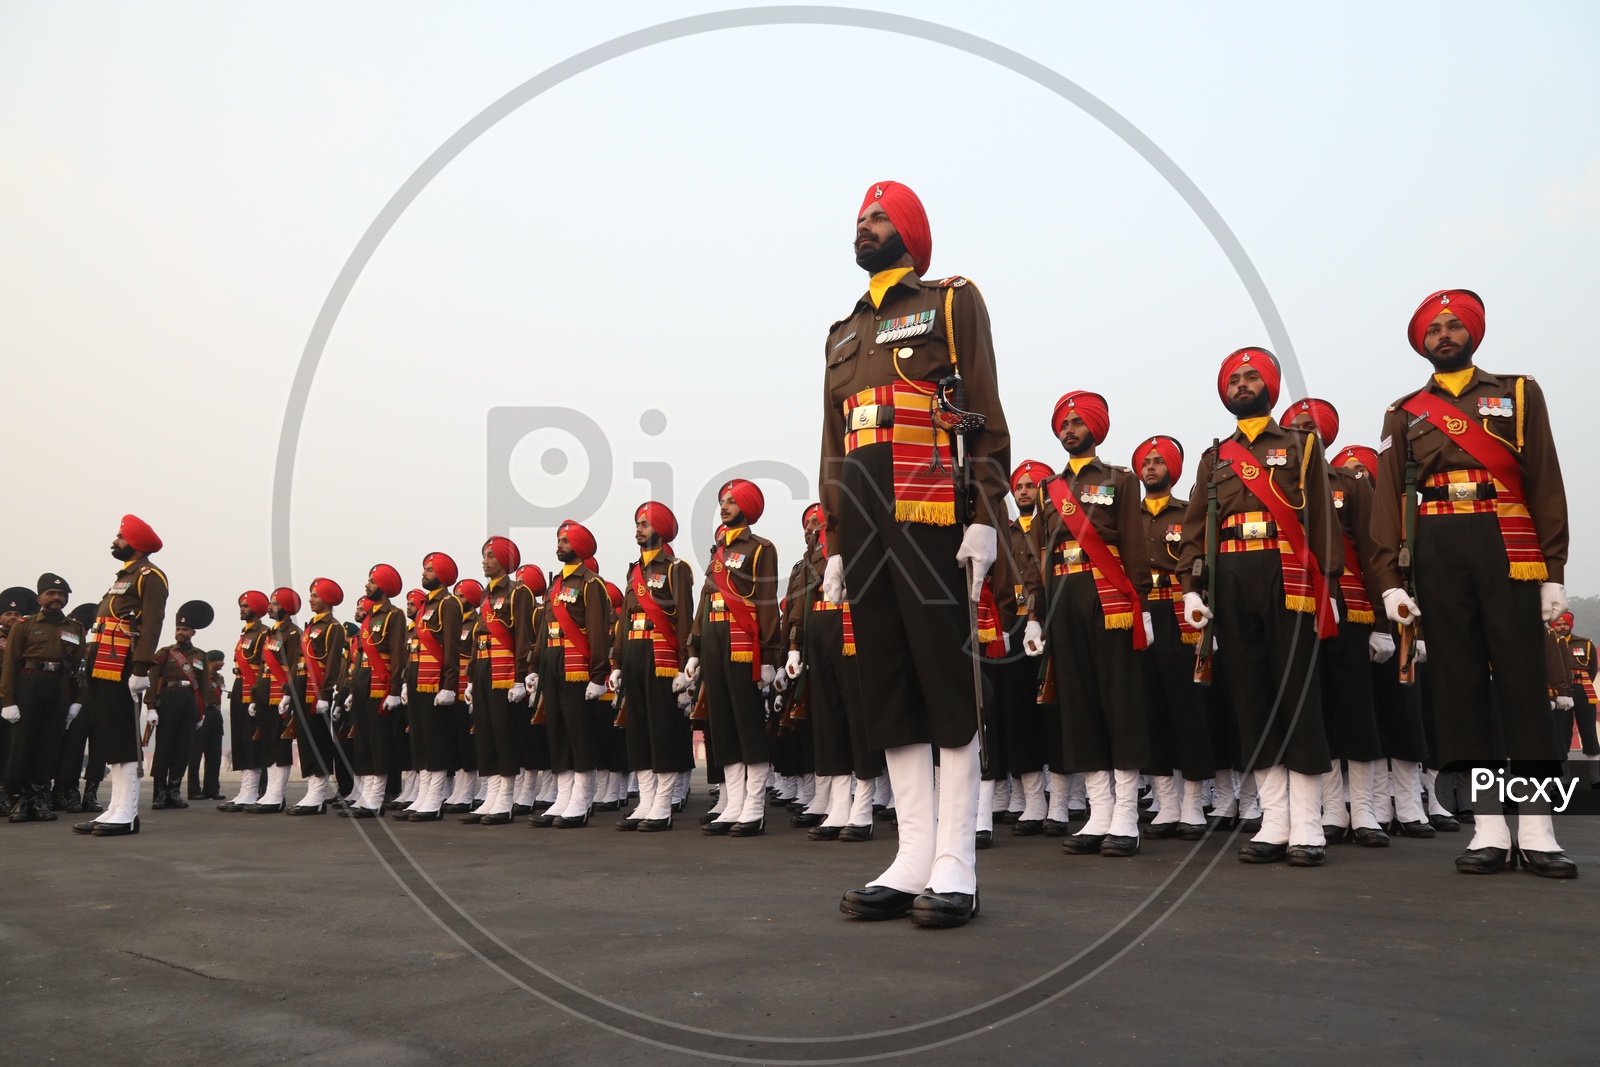 Indian Army Day Celebrations at Parade Ground in DelhiIndian Army Day Celebrations at Parade Ground in Delhi